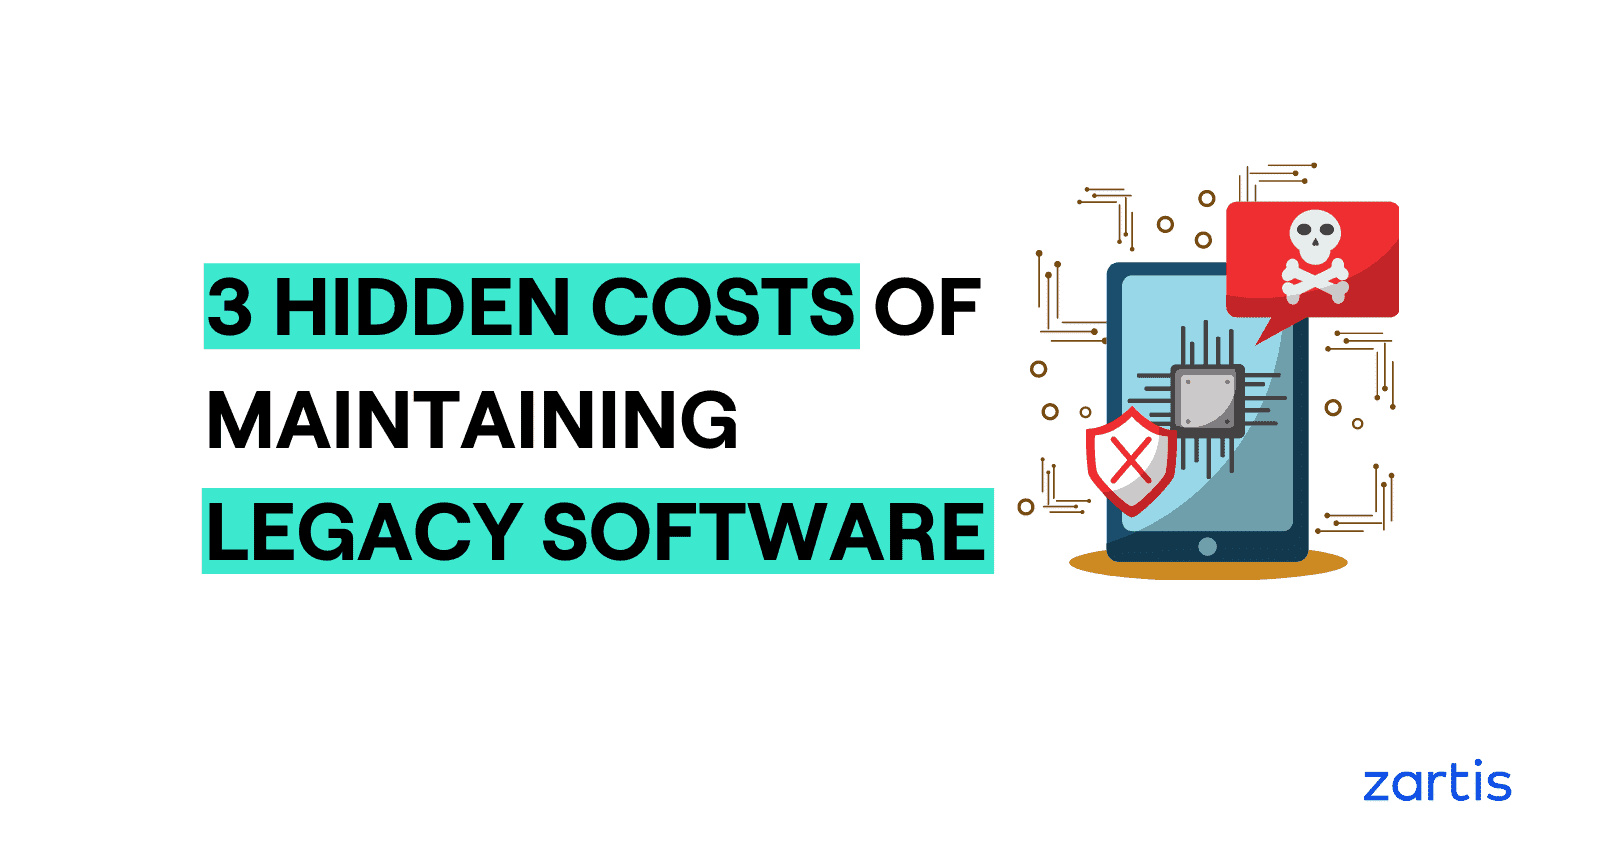 legacy software maintenance and modernizing your tech stack